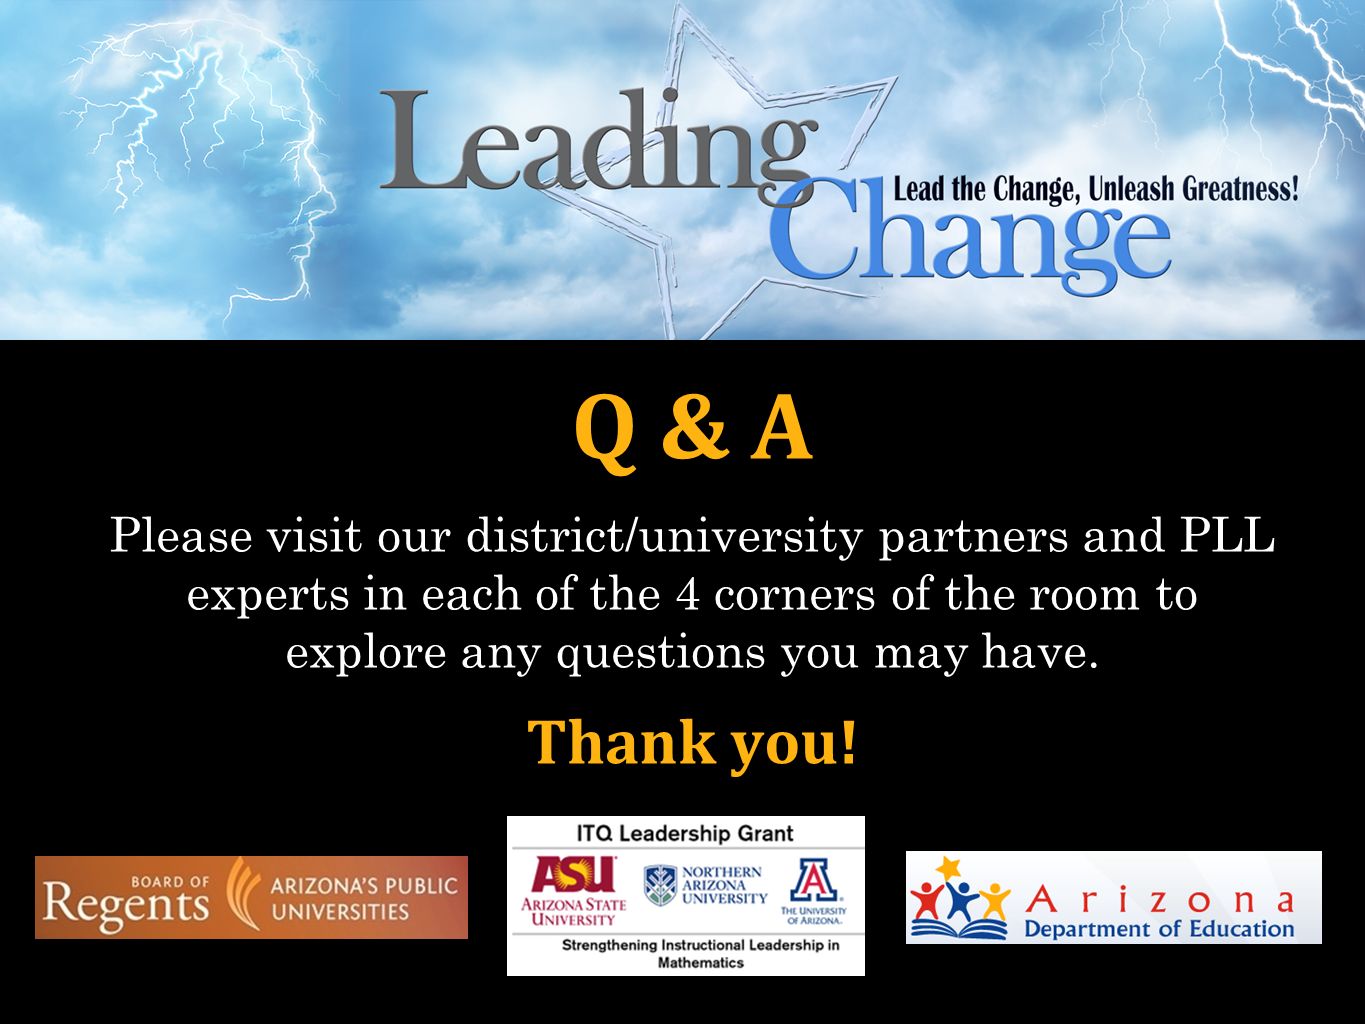 Q & A Please visit our district/university partners and PLL experts in each of the 4 corners of the room to explore any questions you may have.